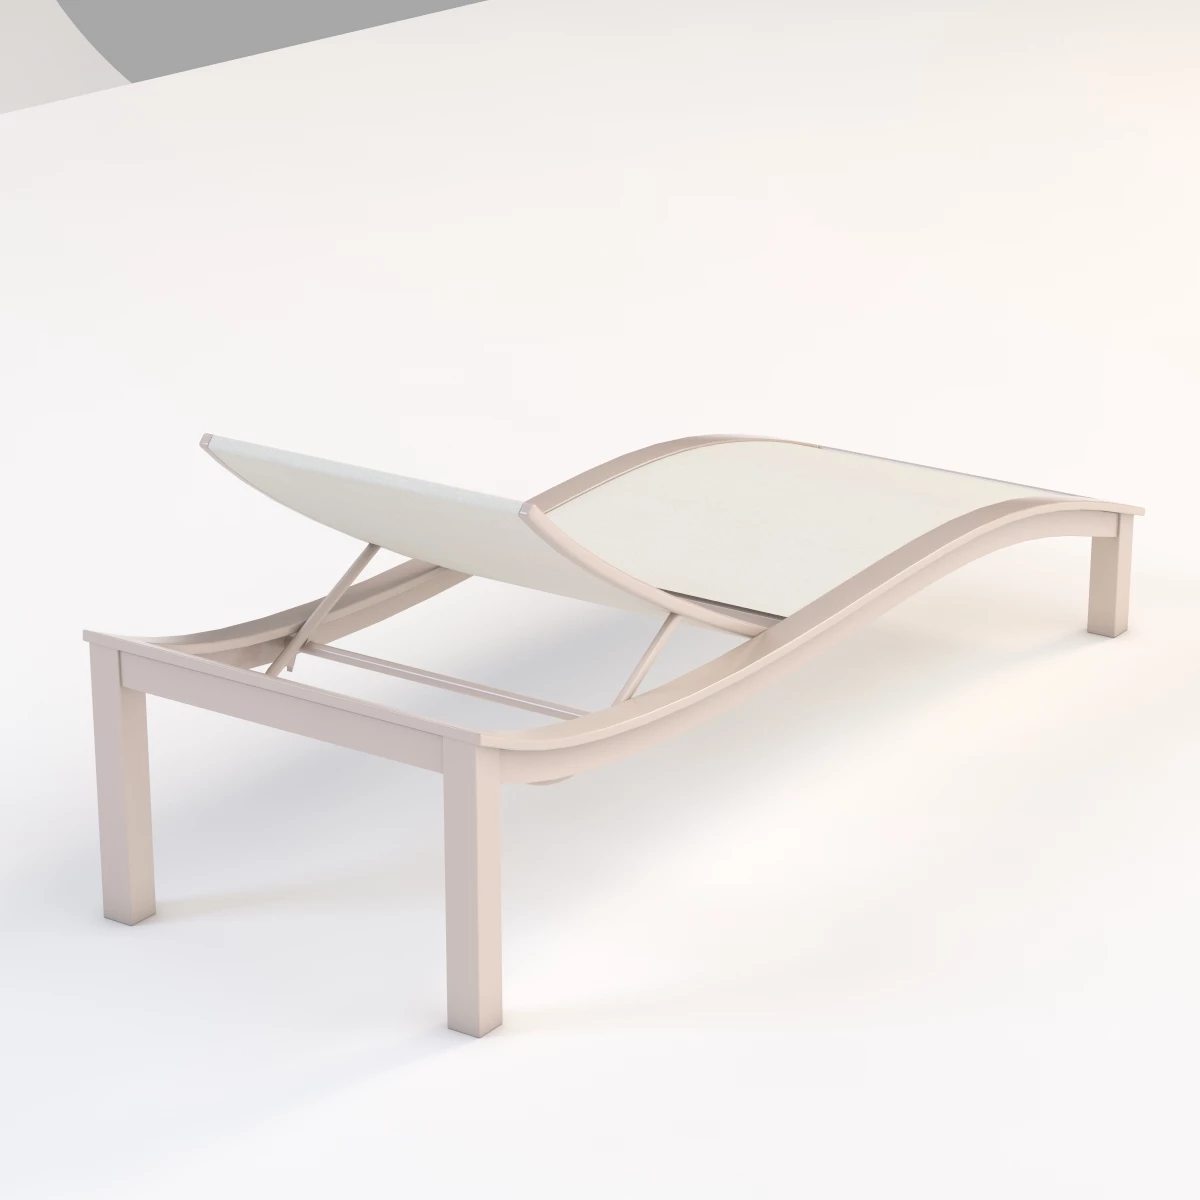 Bazza Sling Chaise Sunlounge by Telescope Casual Furniture 3D Model_03